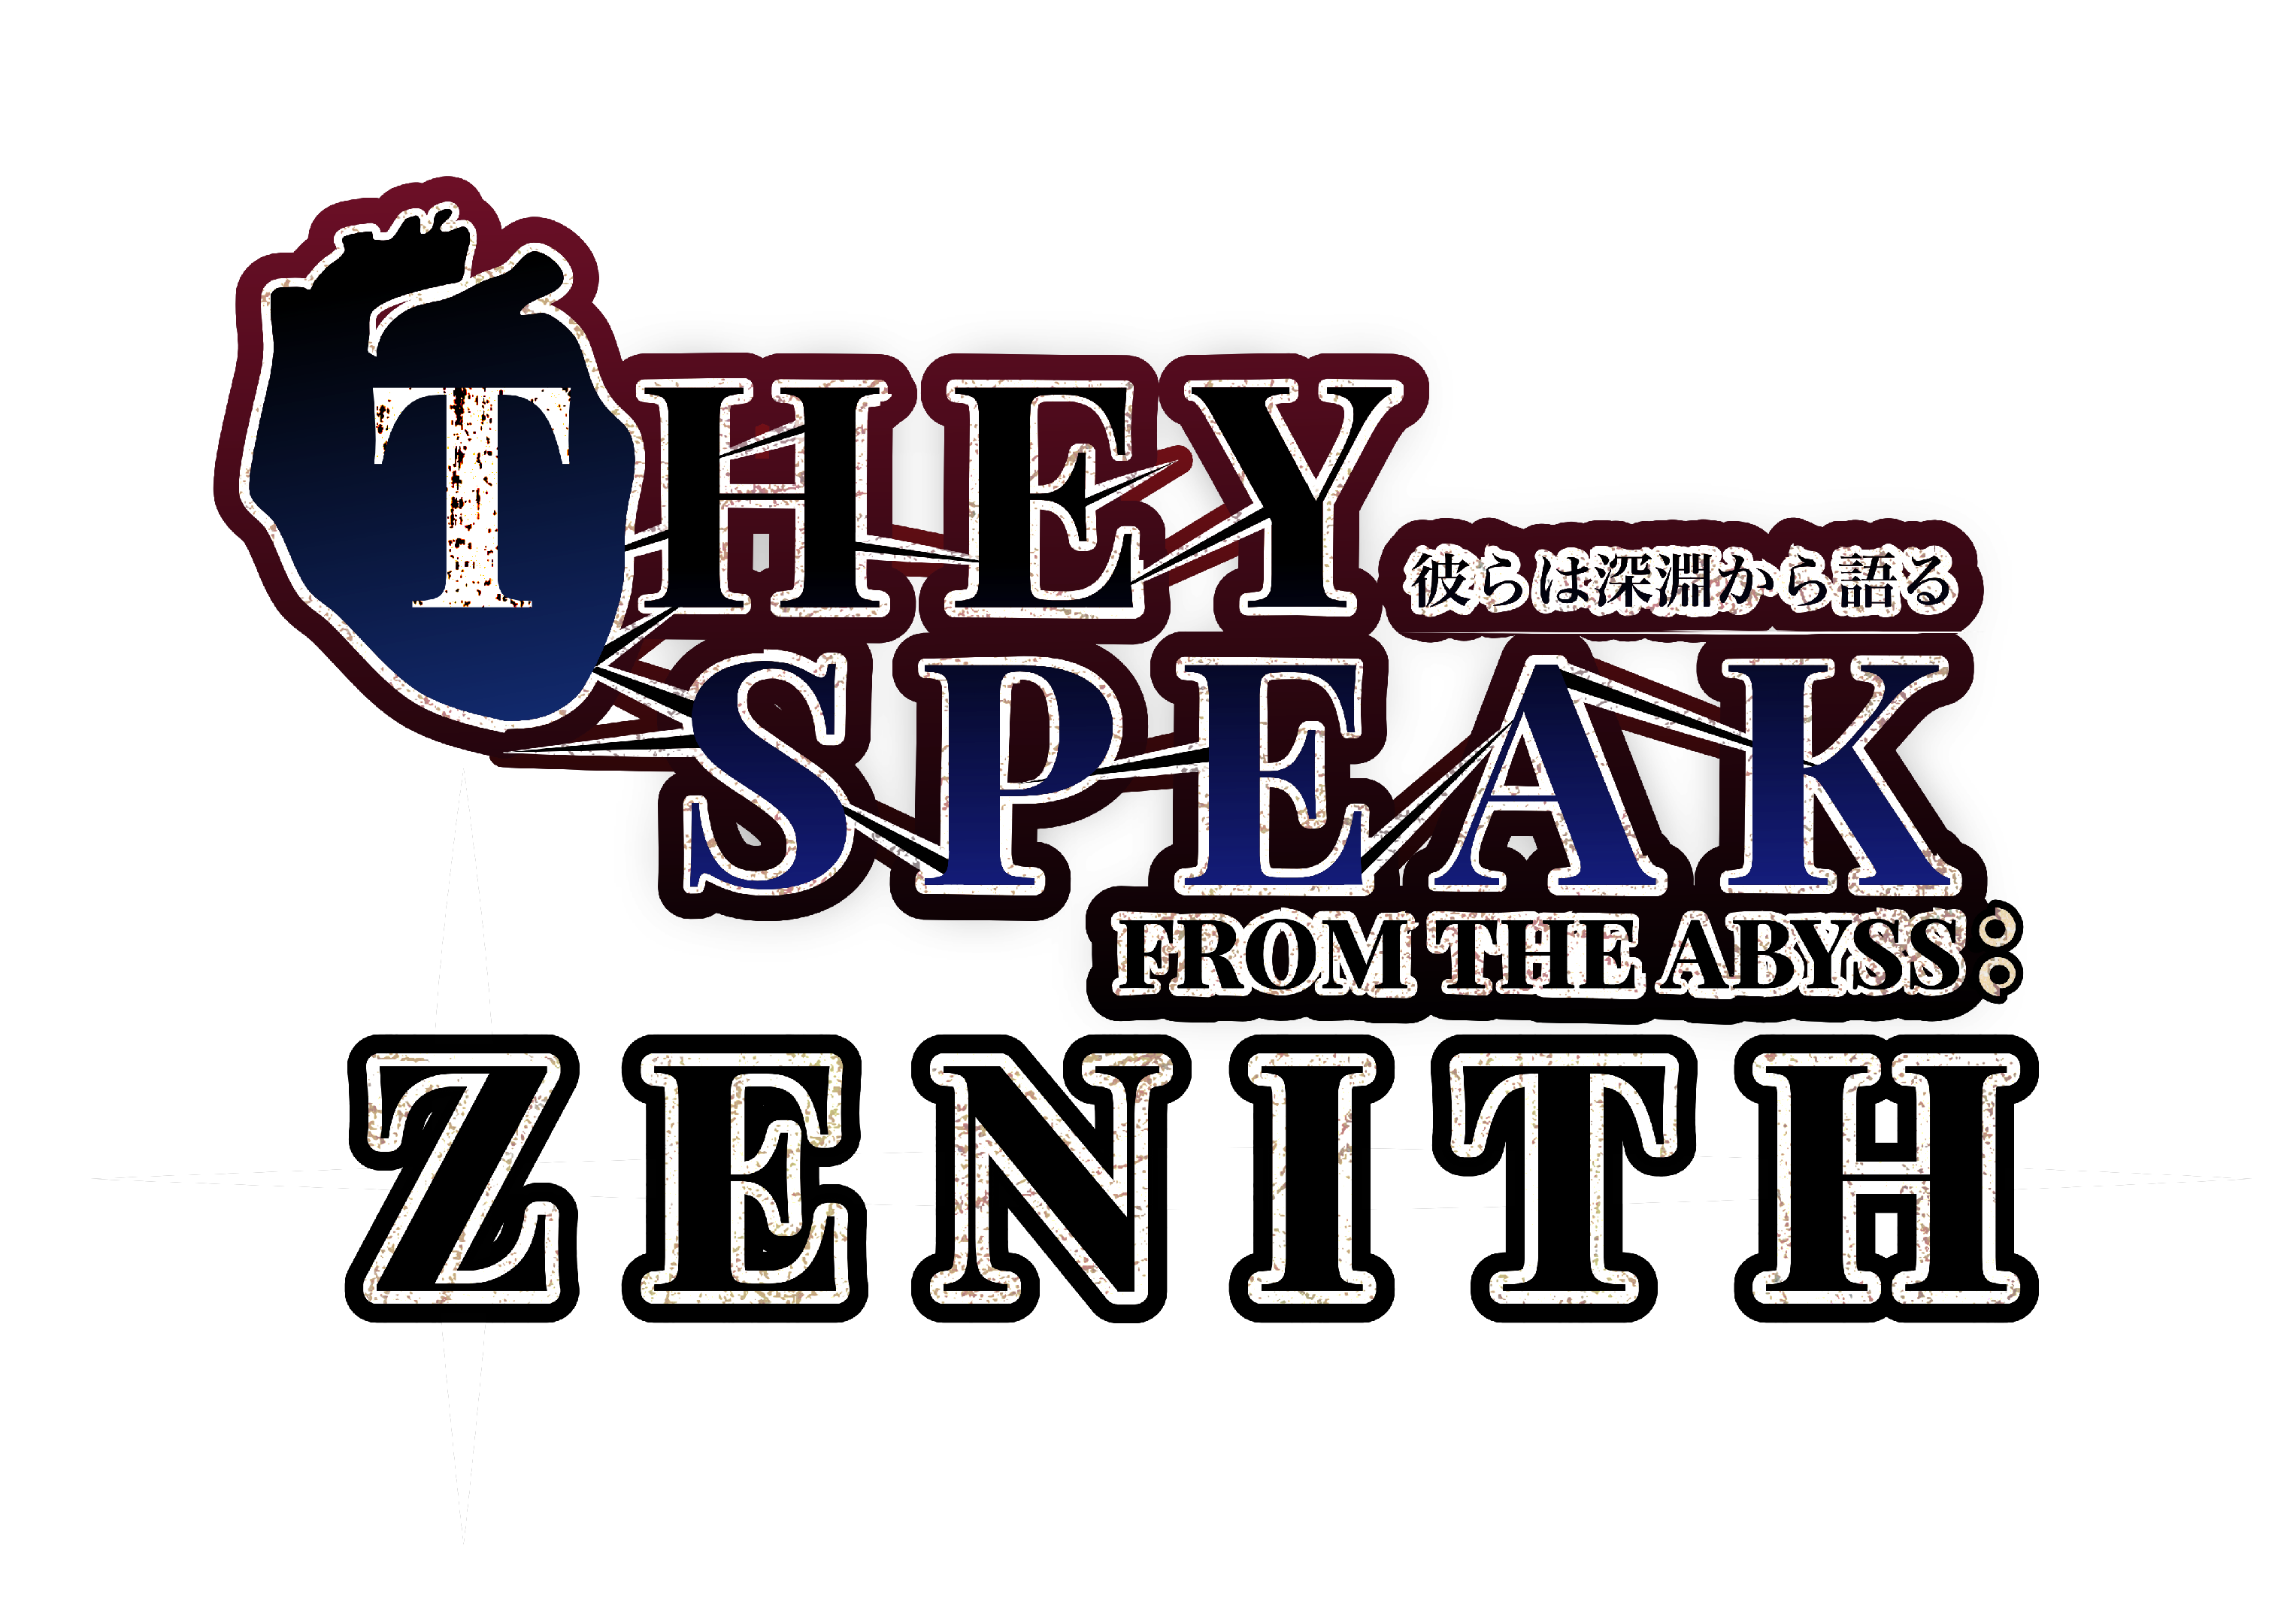 THEY SPEAK FROM THE ABYSS: ZENITH